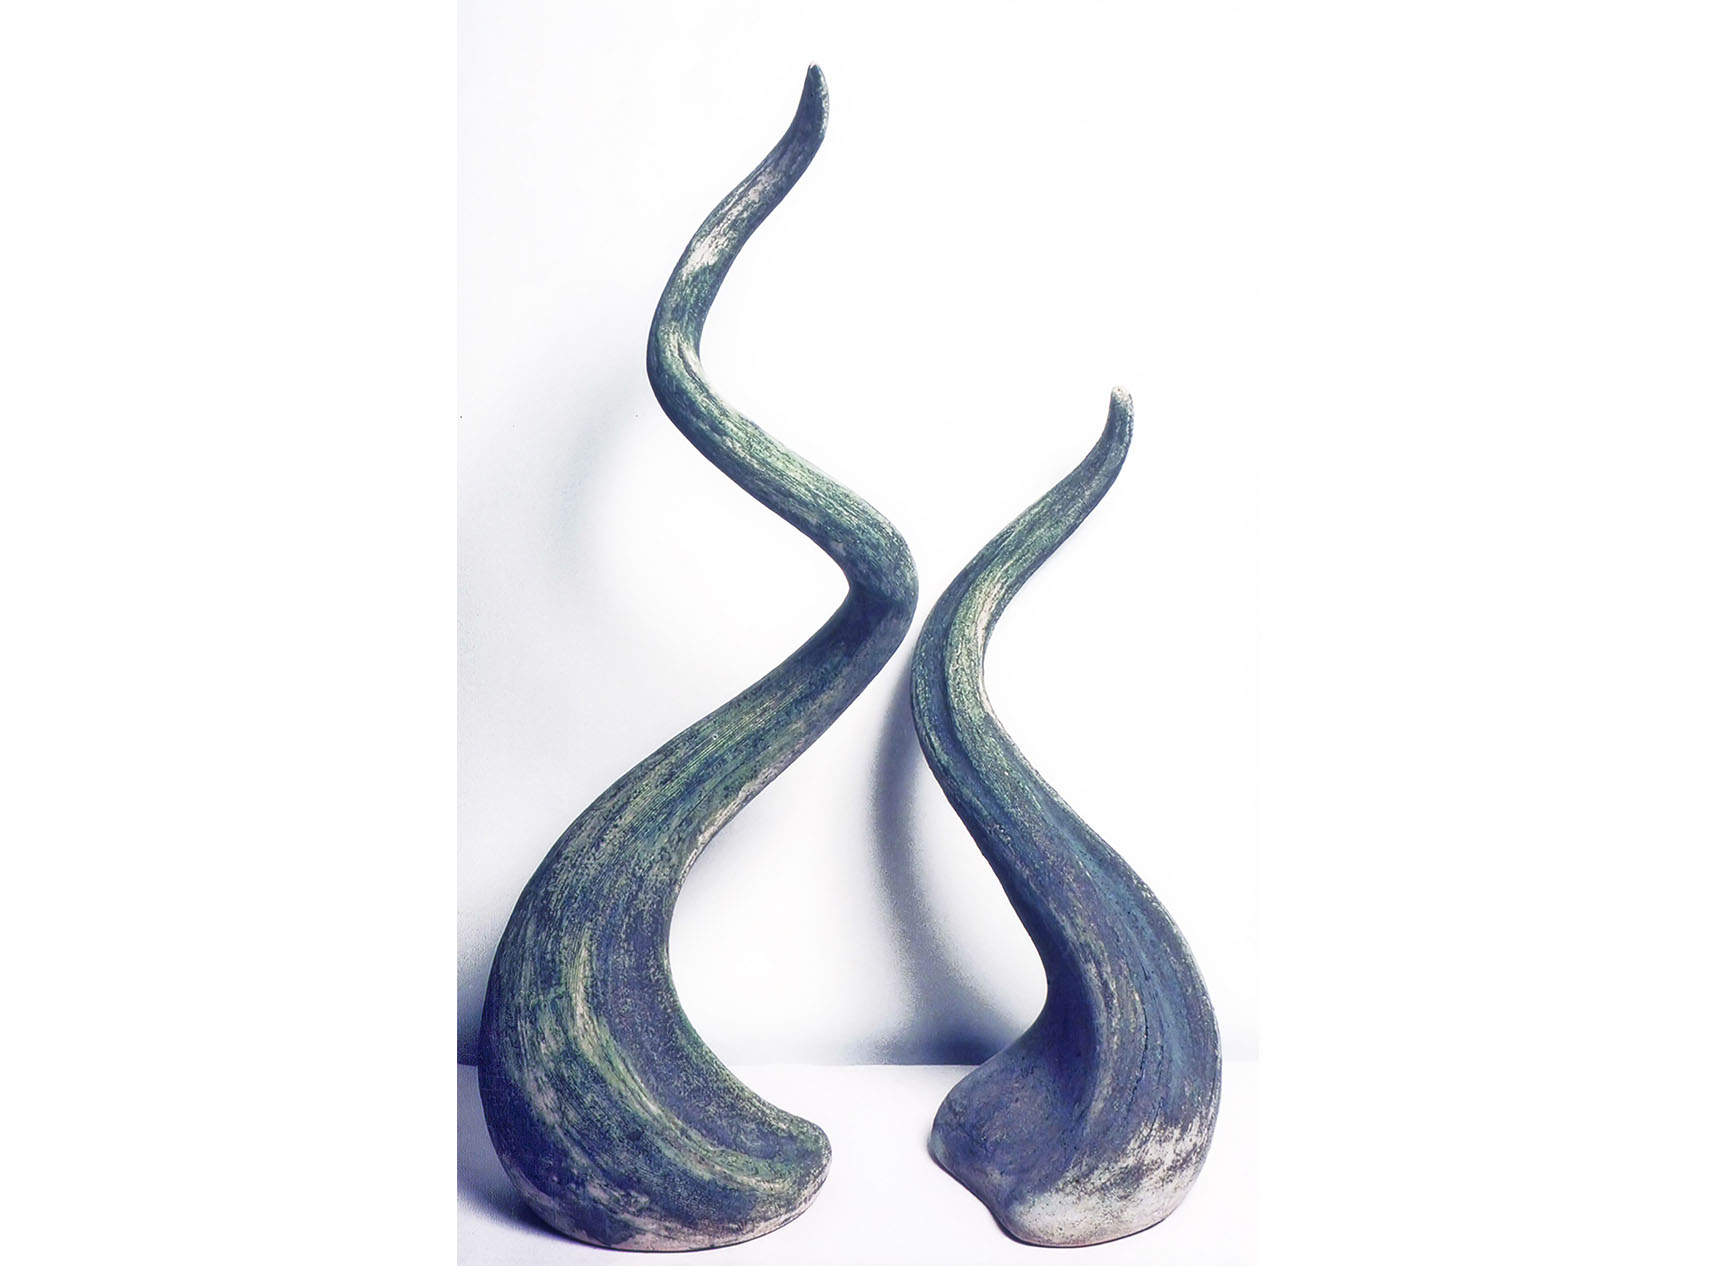  Two clay tall twisted sculptures - Unleashed 1 & 2